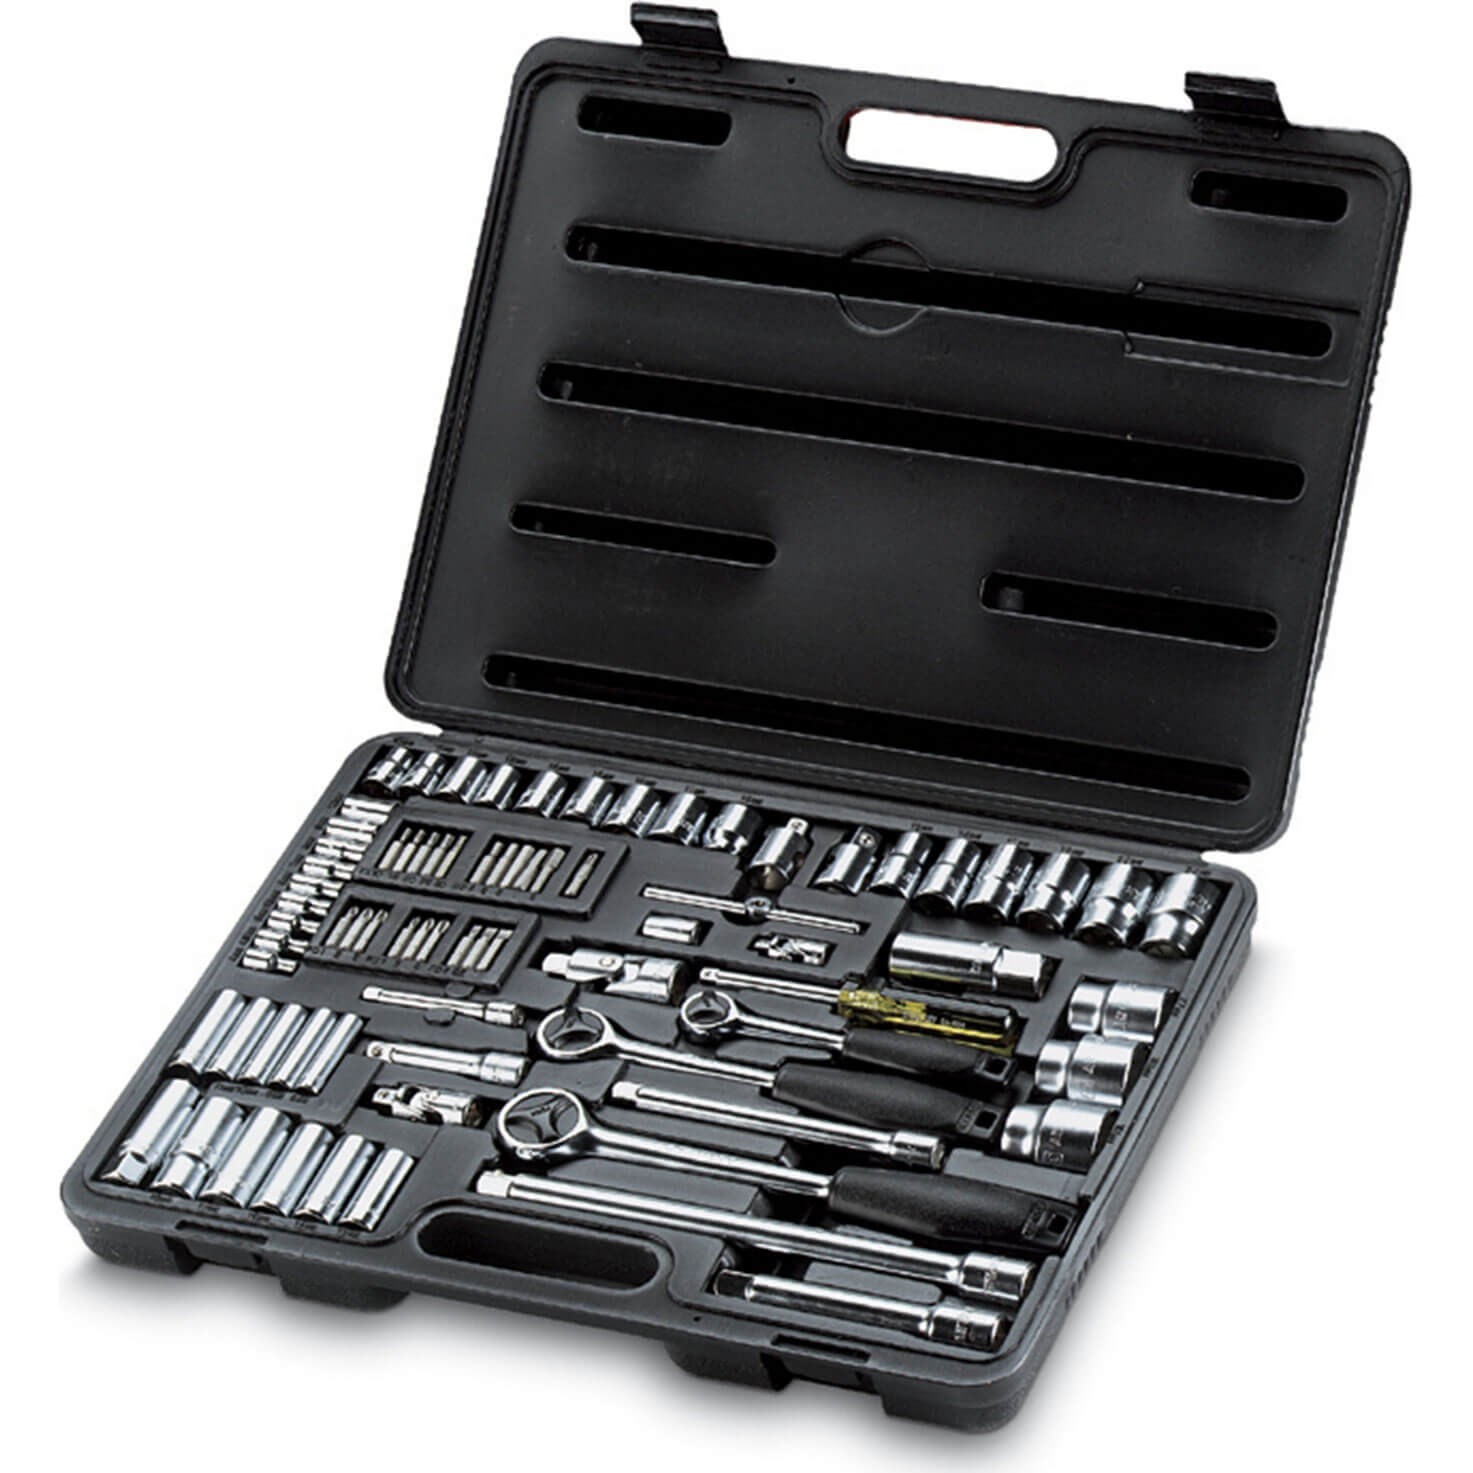 Stanley Tech3 Limited Edition 1/4 &1/2in Drive 78 Piece Socket & Accessory Set 